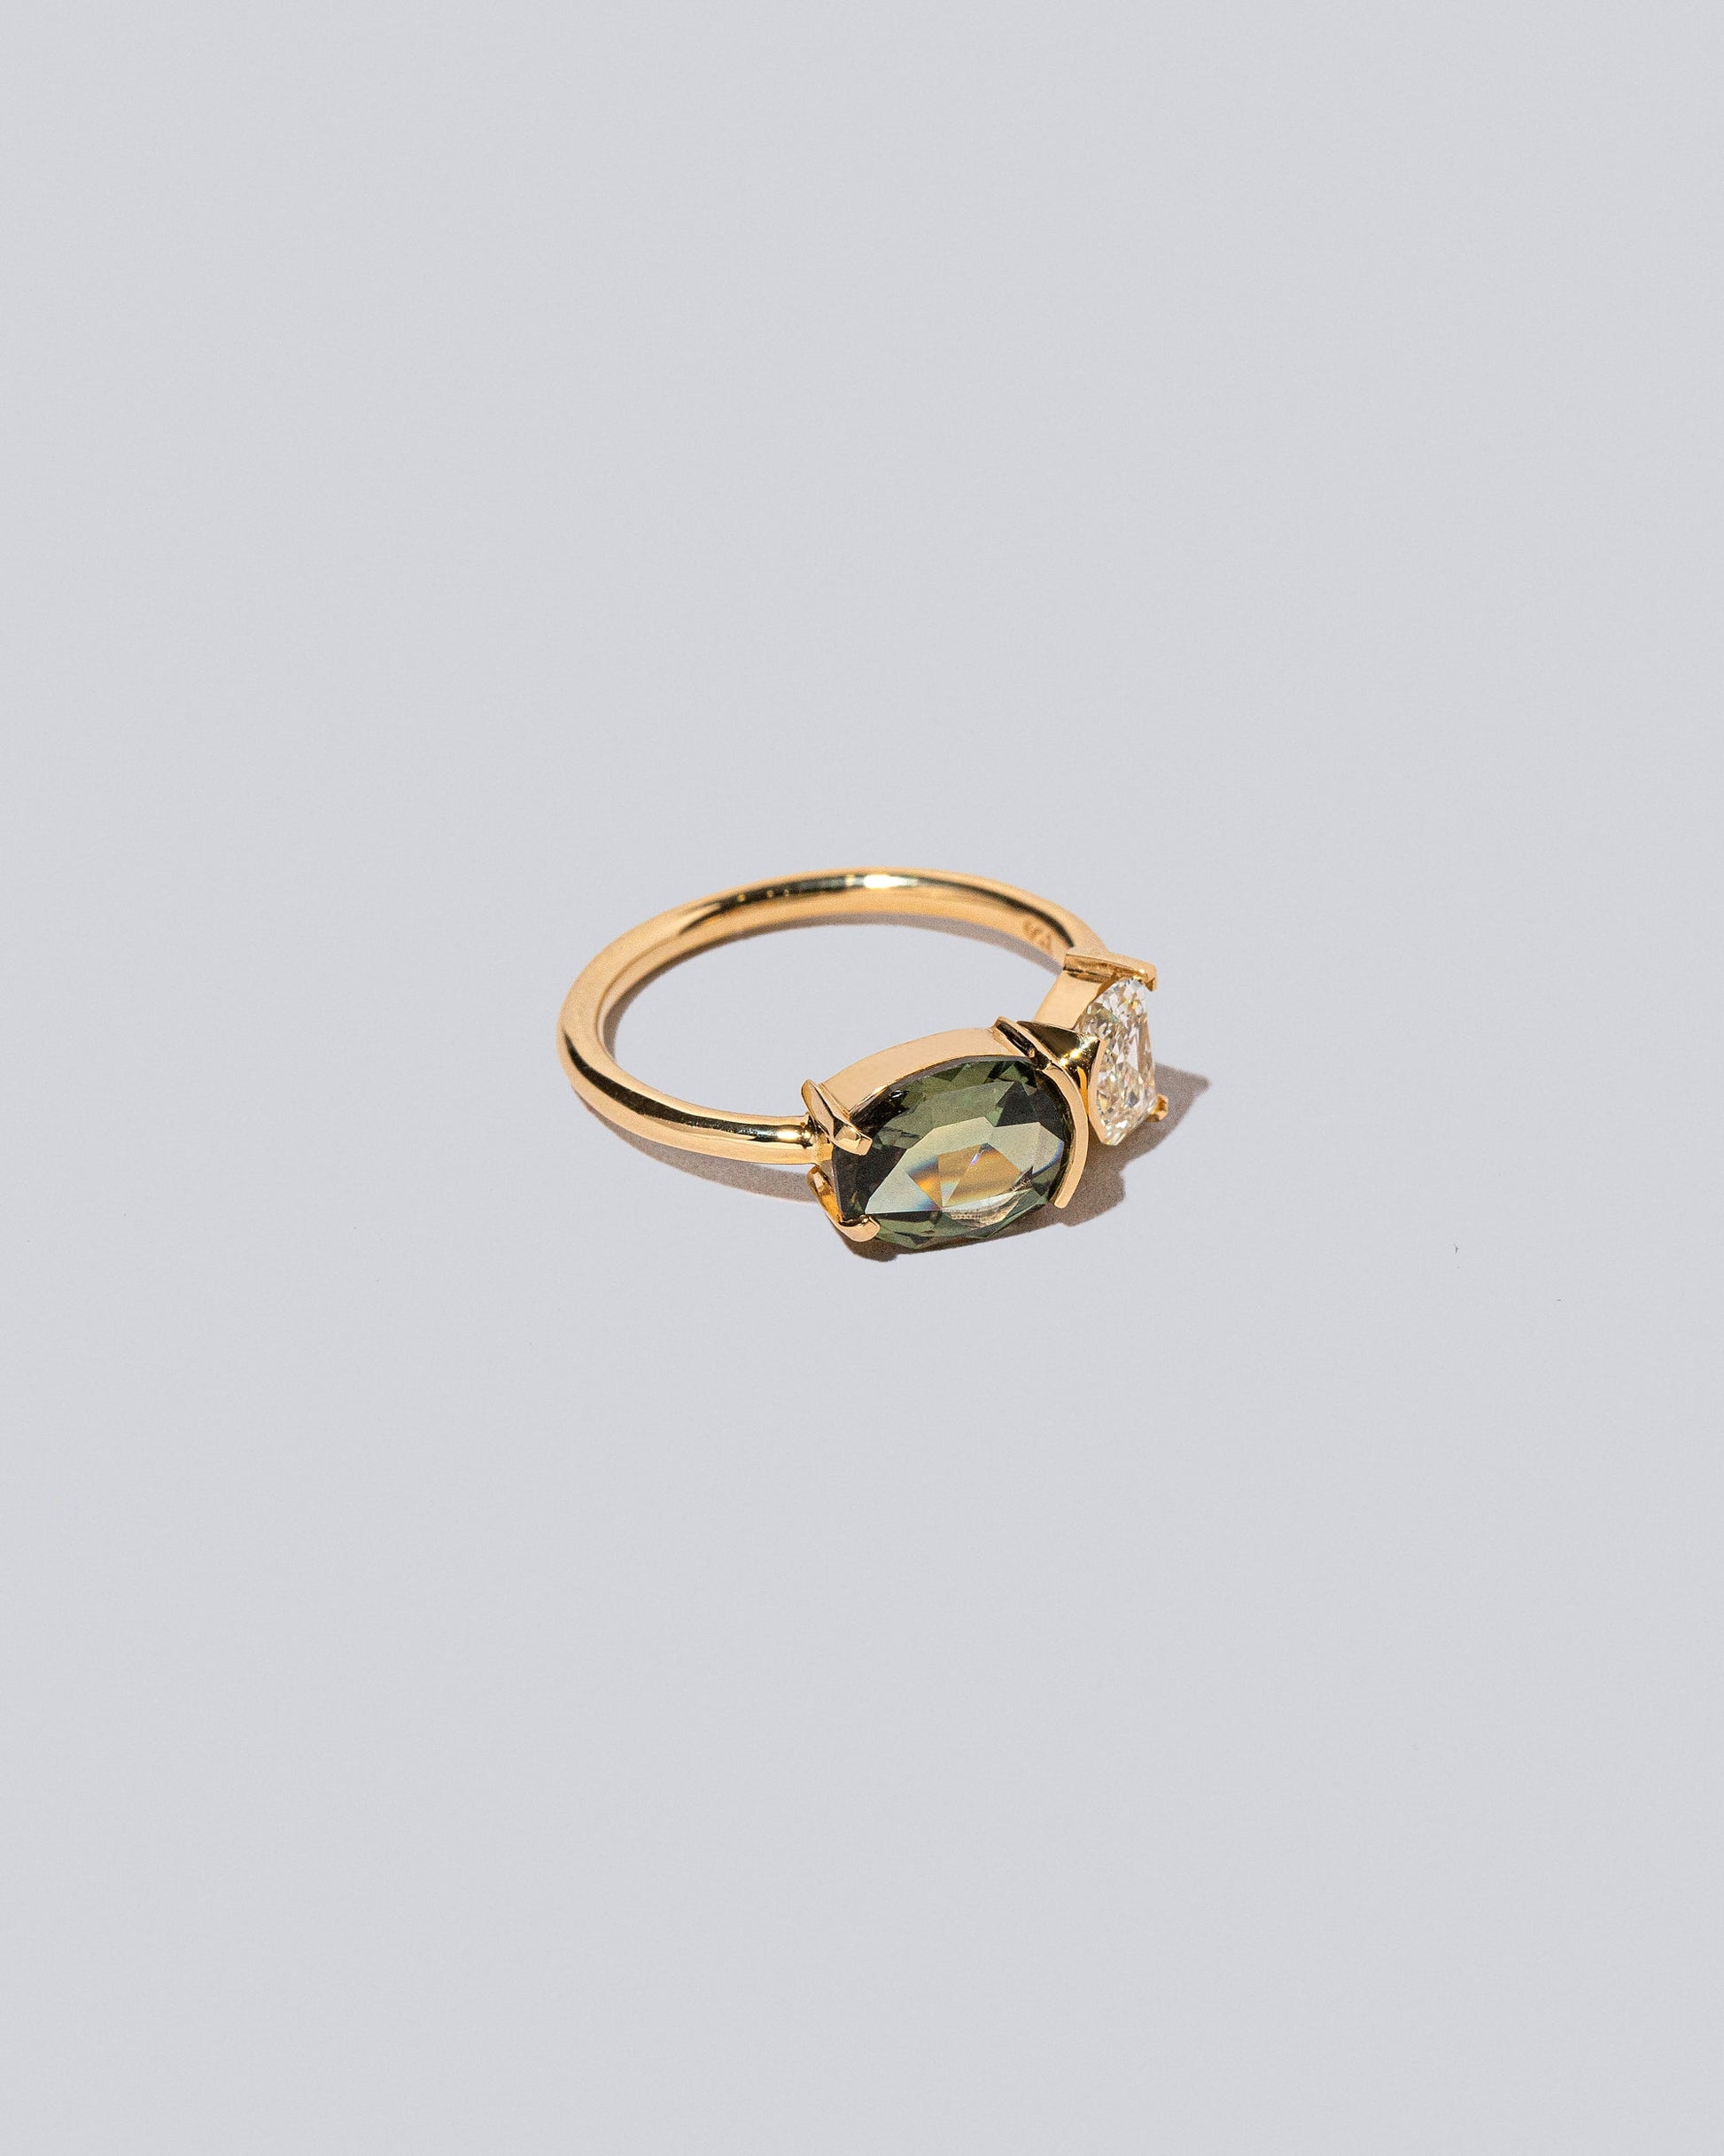 Product photo of Finch Ring on a light color background 